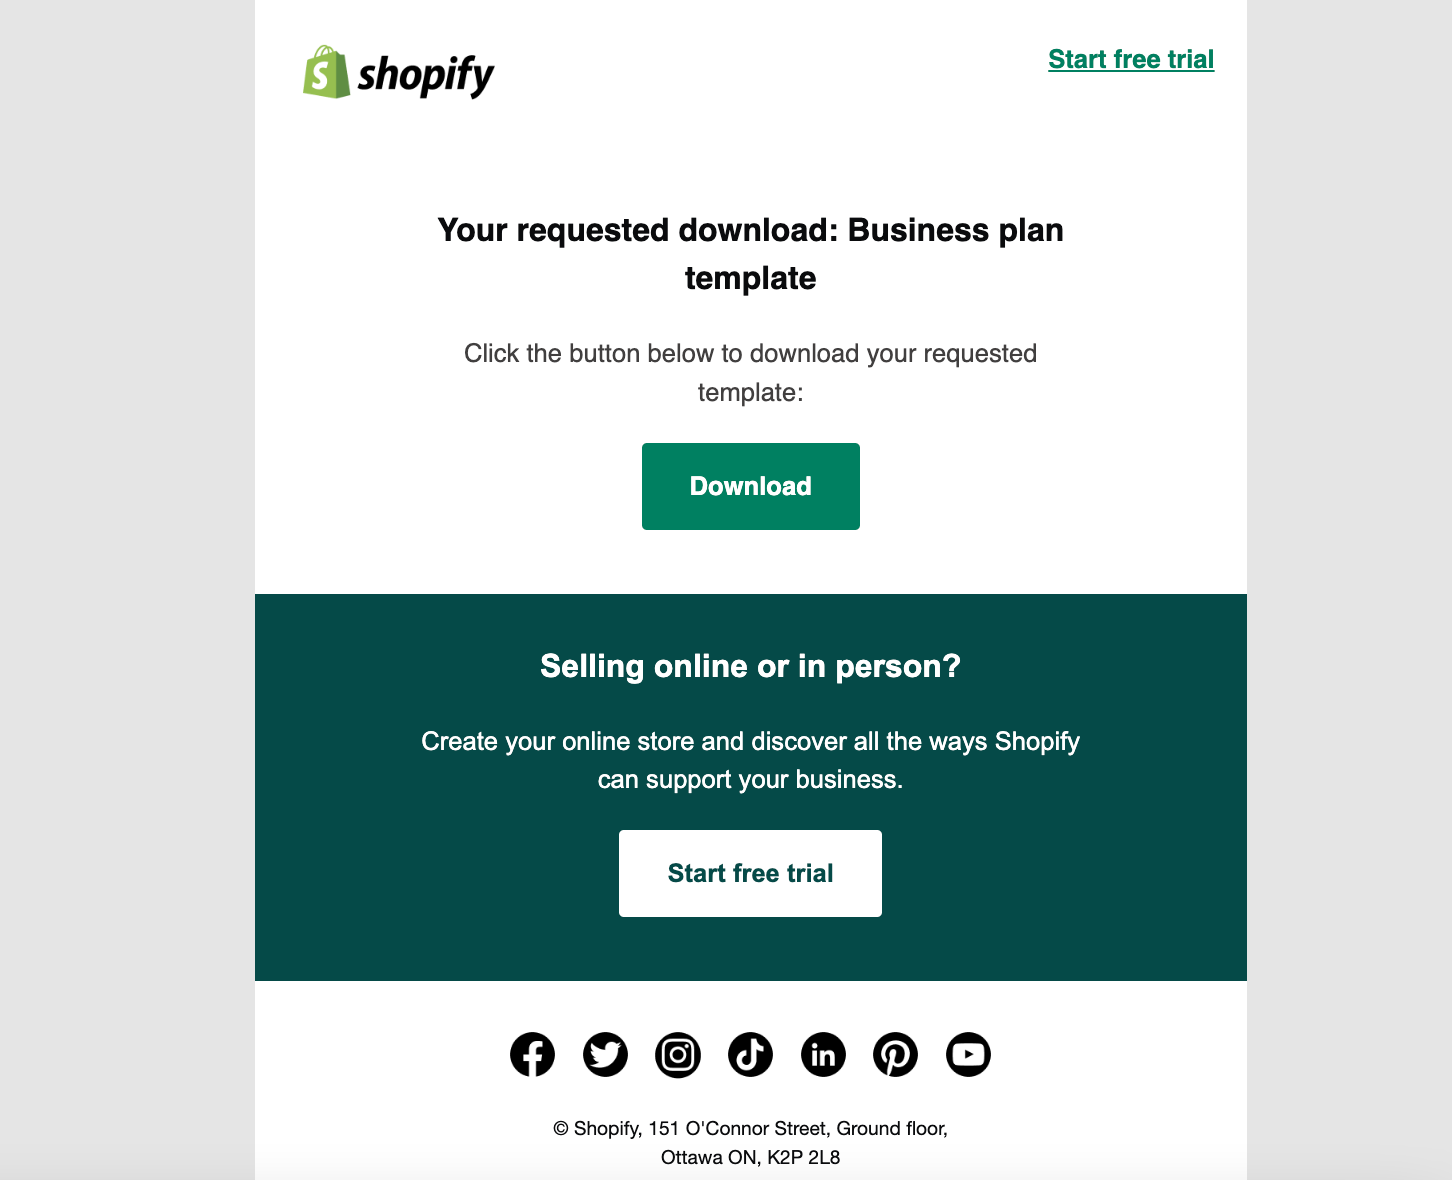 Shopify's email with a downloadable business plan template